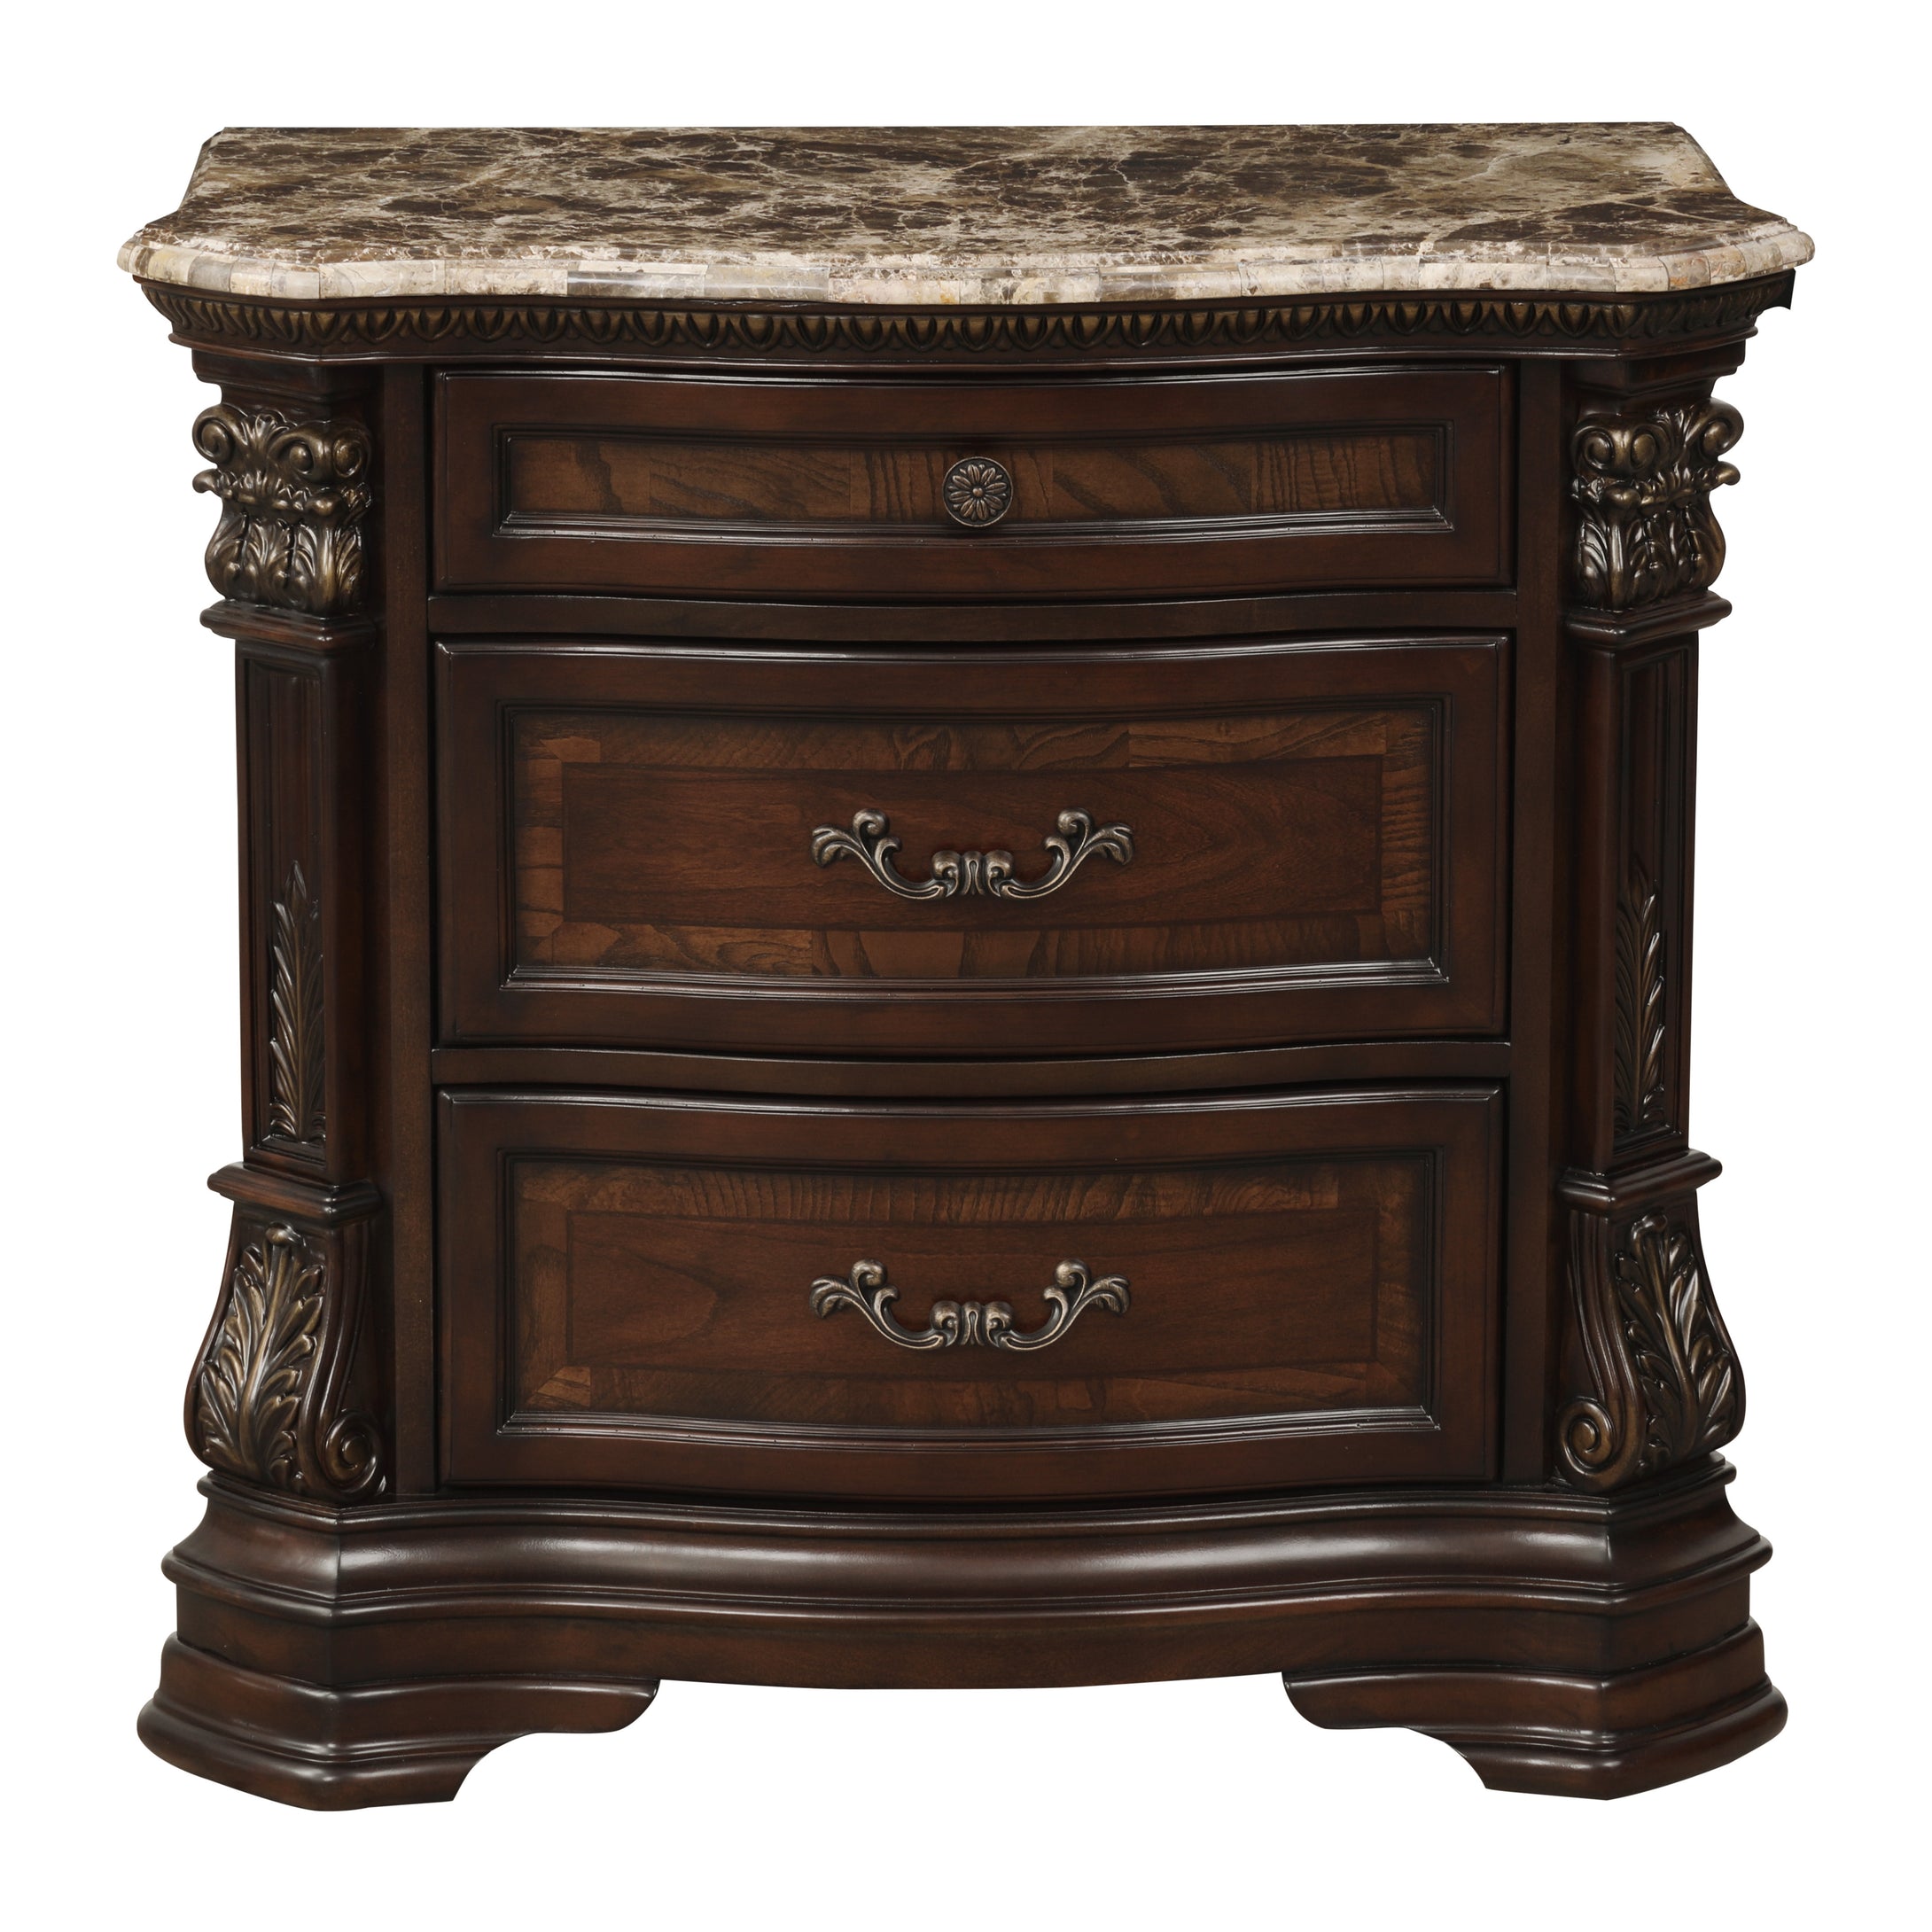 1919-4 Night Stand, Marble Top